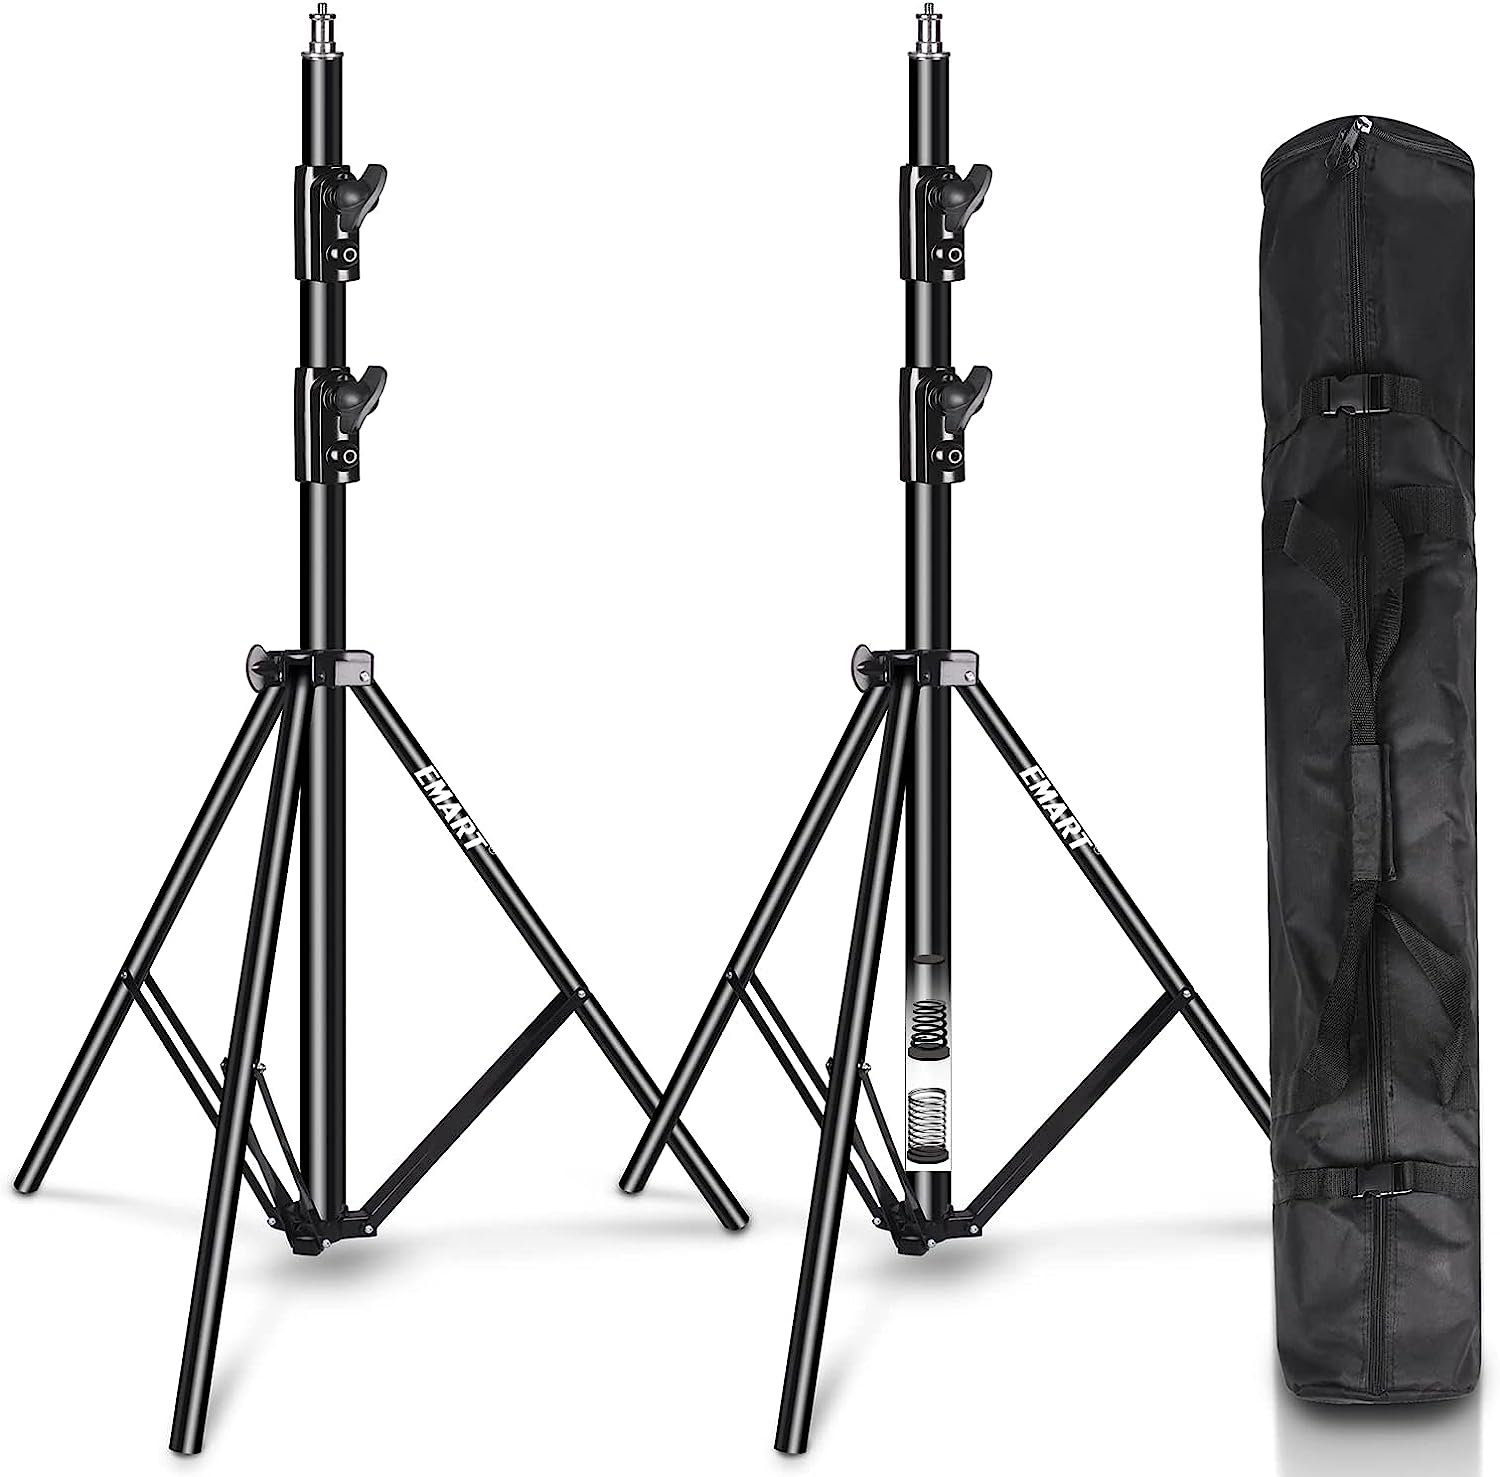 8.5 ft Heavy Duty Aluminum Light Stand with Carrying Bag